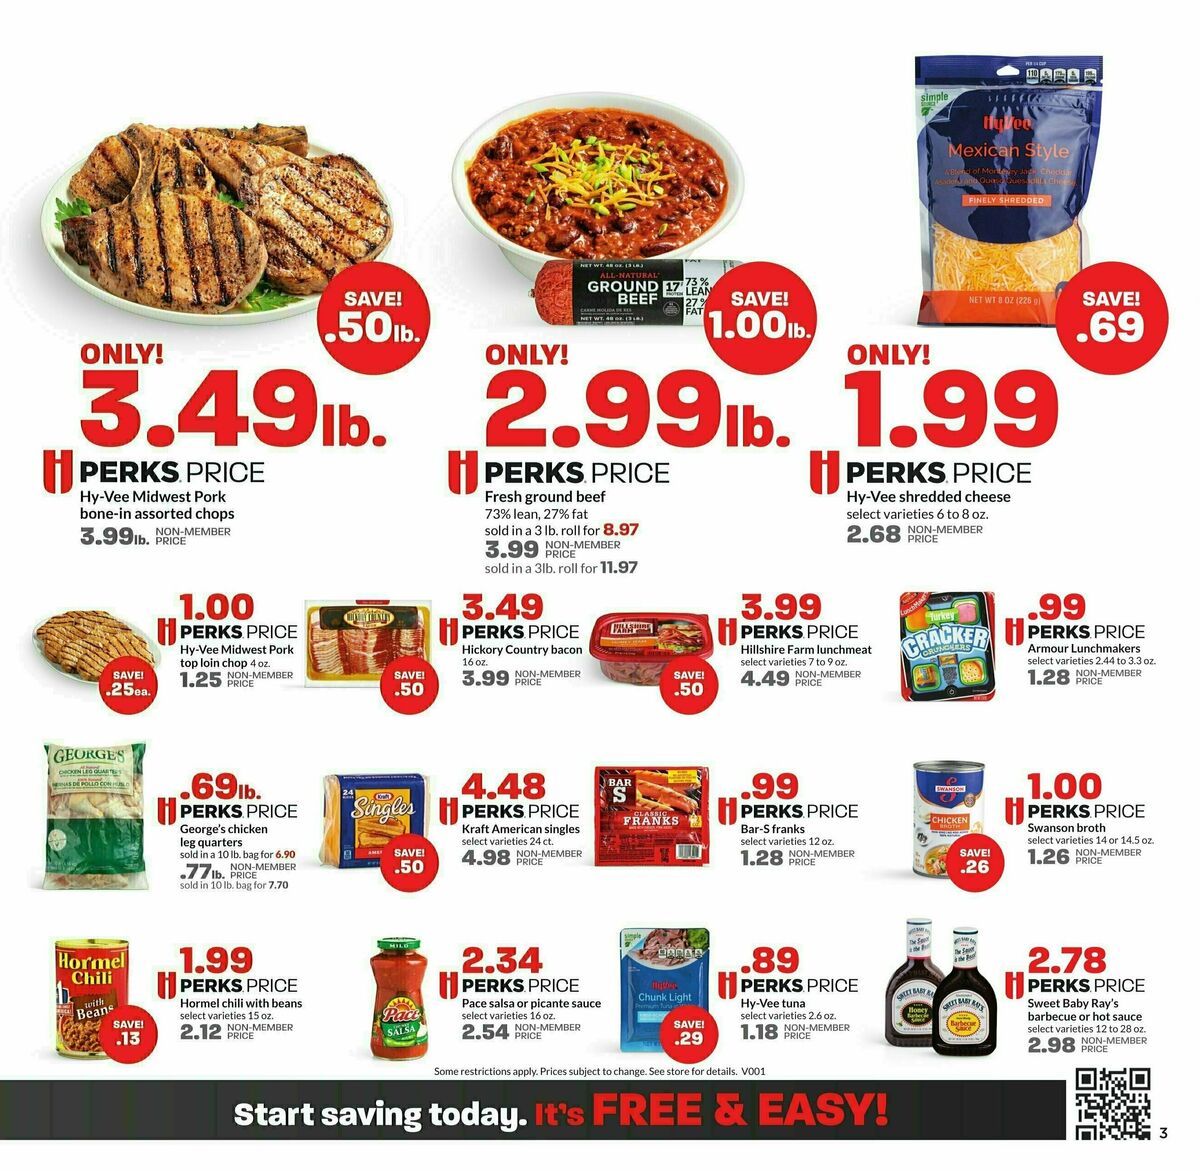 Hy-Vee Perks Prices Weekly Ad from November 1